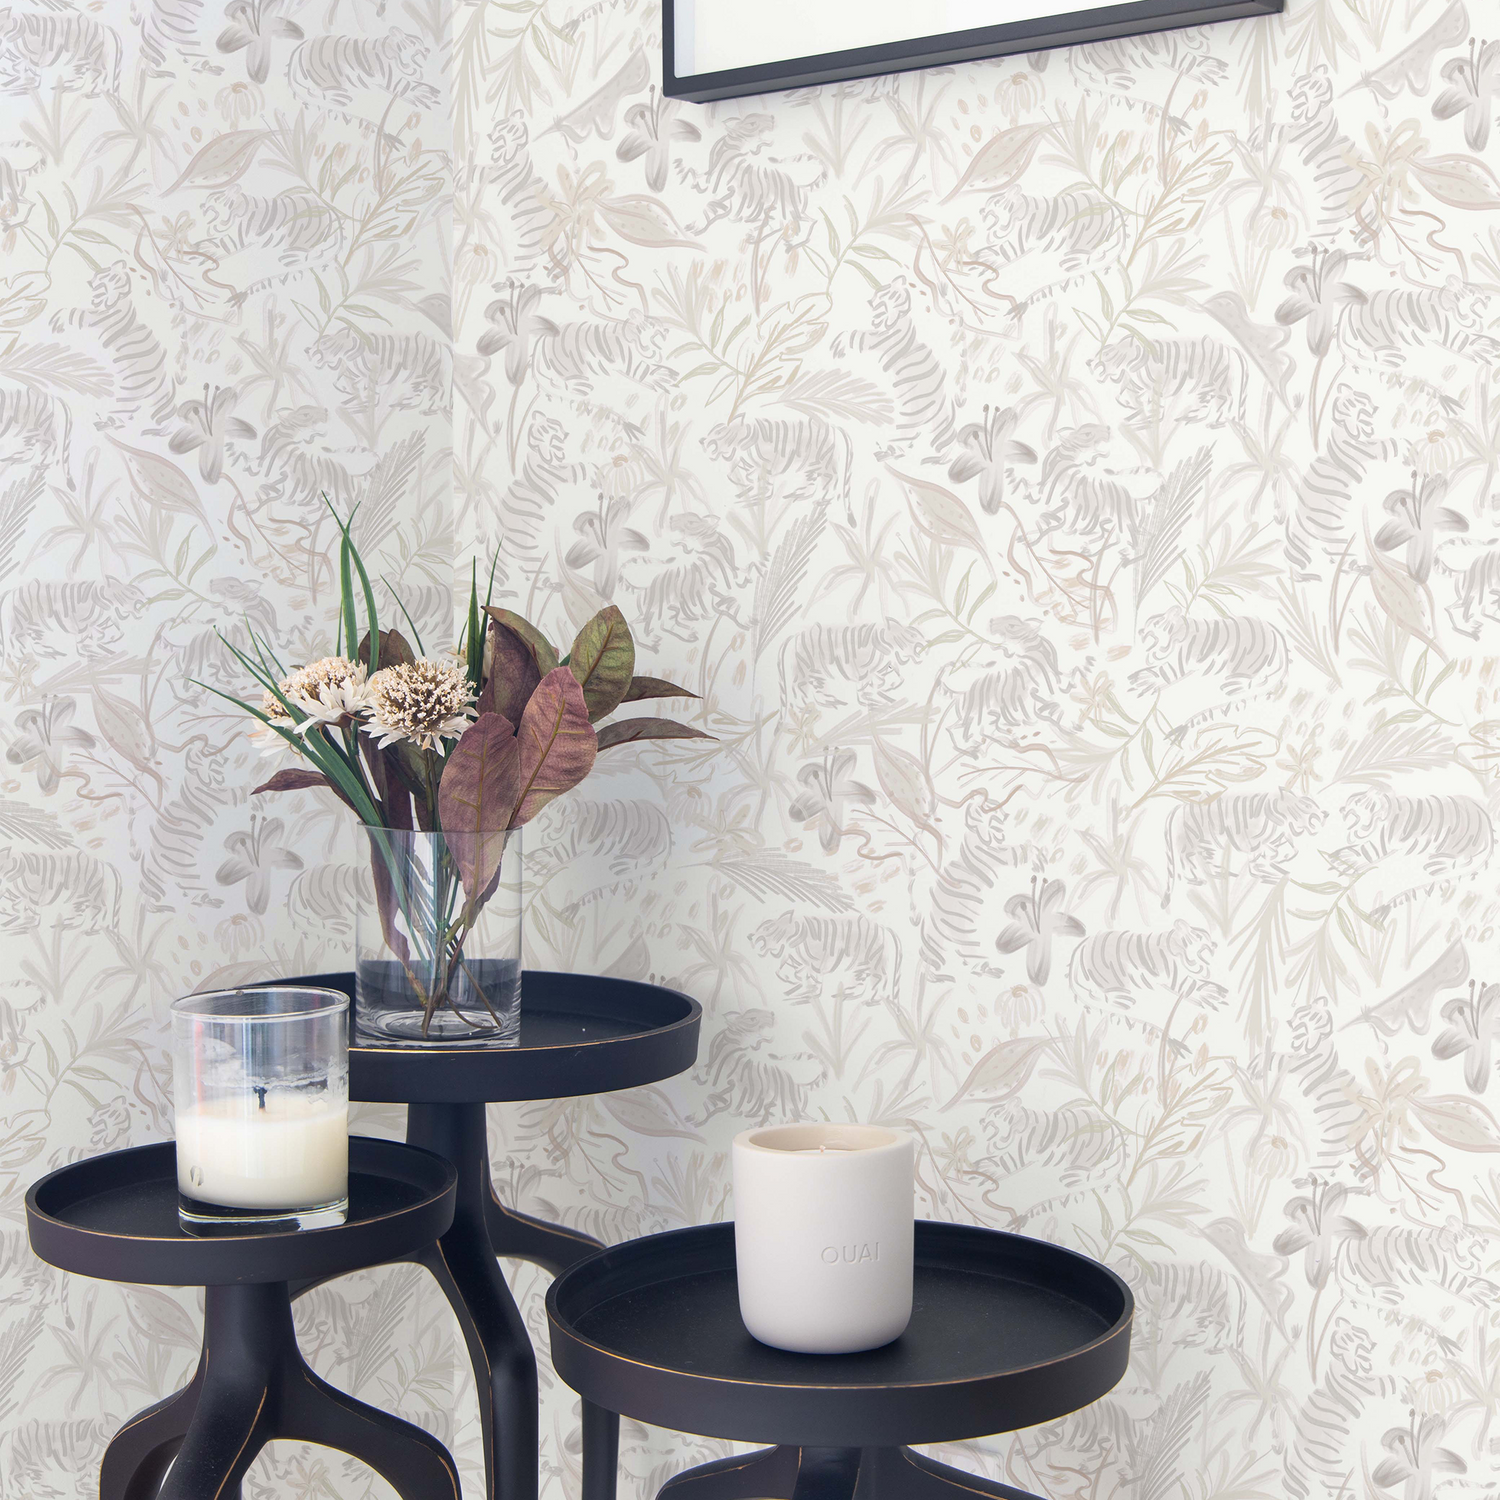 Corner styled with Beige Chinoiserie Tiger Printed Wallpaper next to three dark decorative tables holding two candles and plants in clear vase 